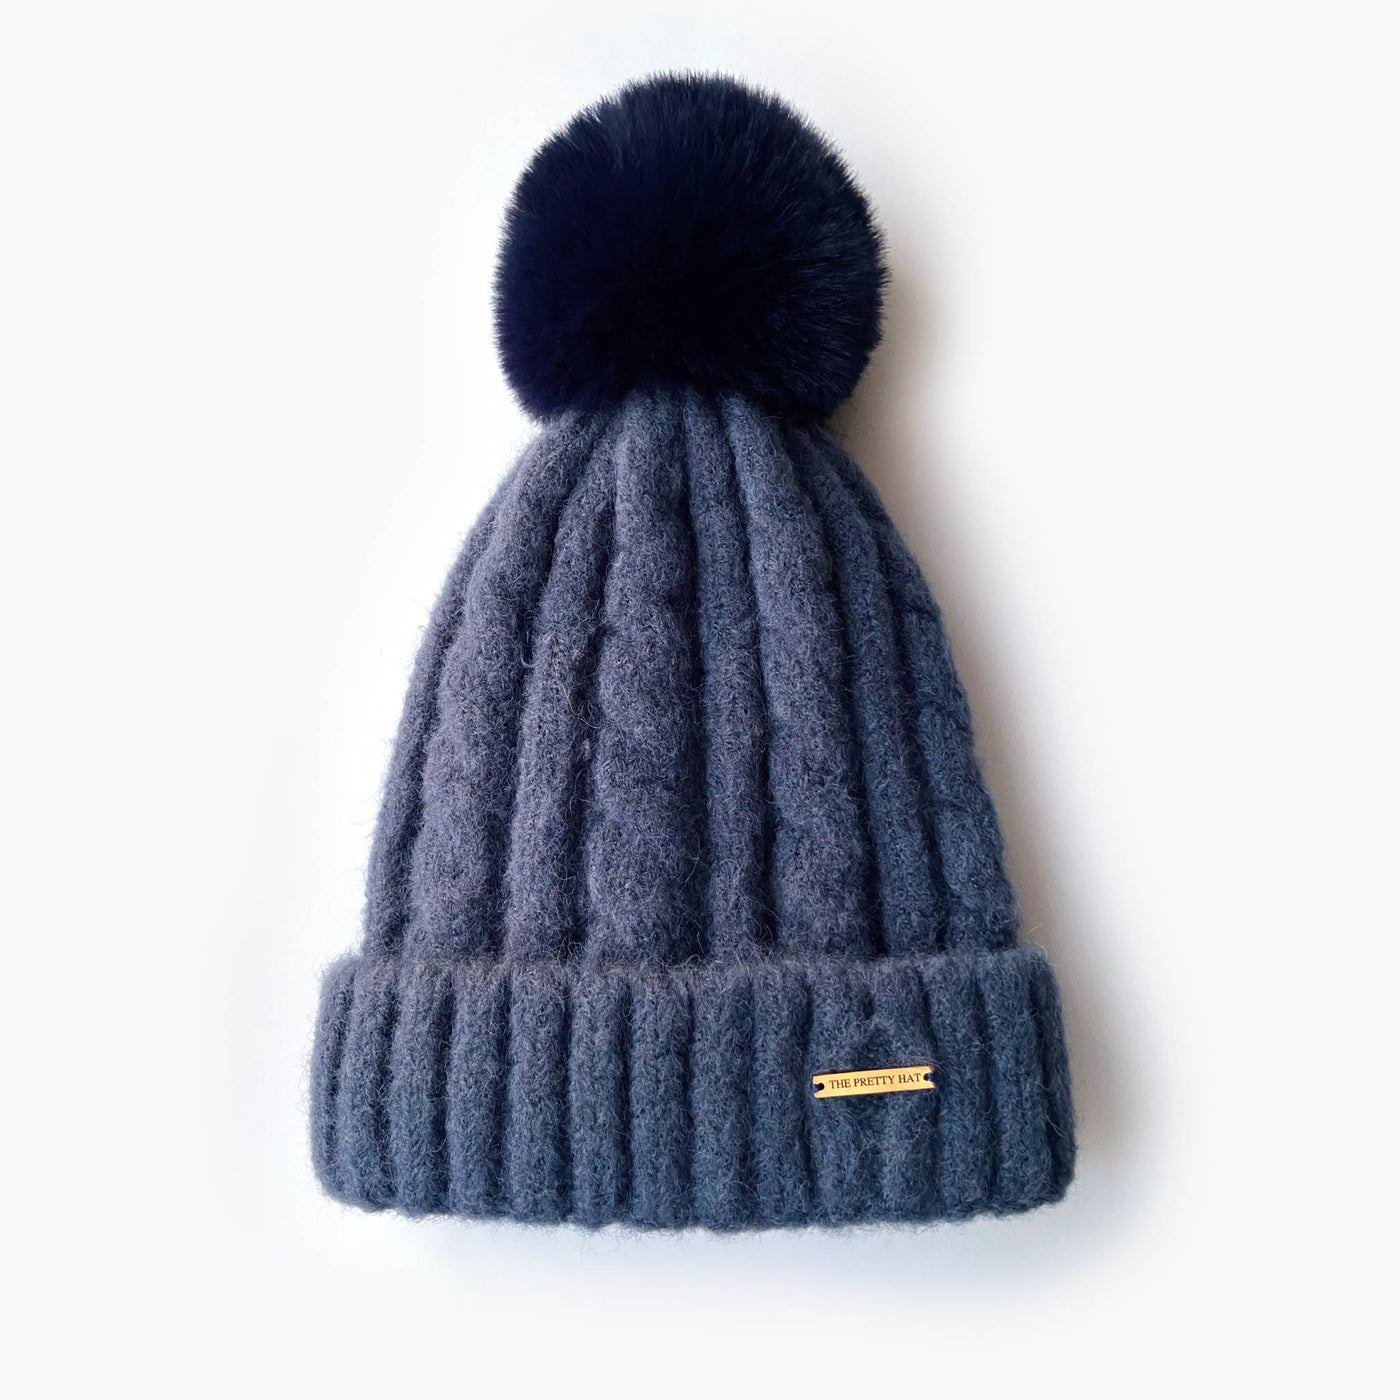 Laura Satin Lined Beanie With Detachable Pom - Sapphire Blue - The Pretty Hat